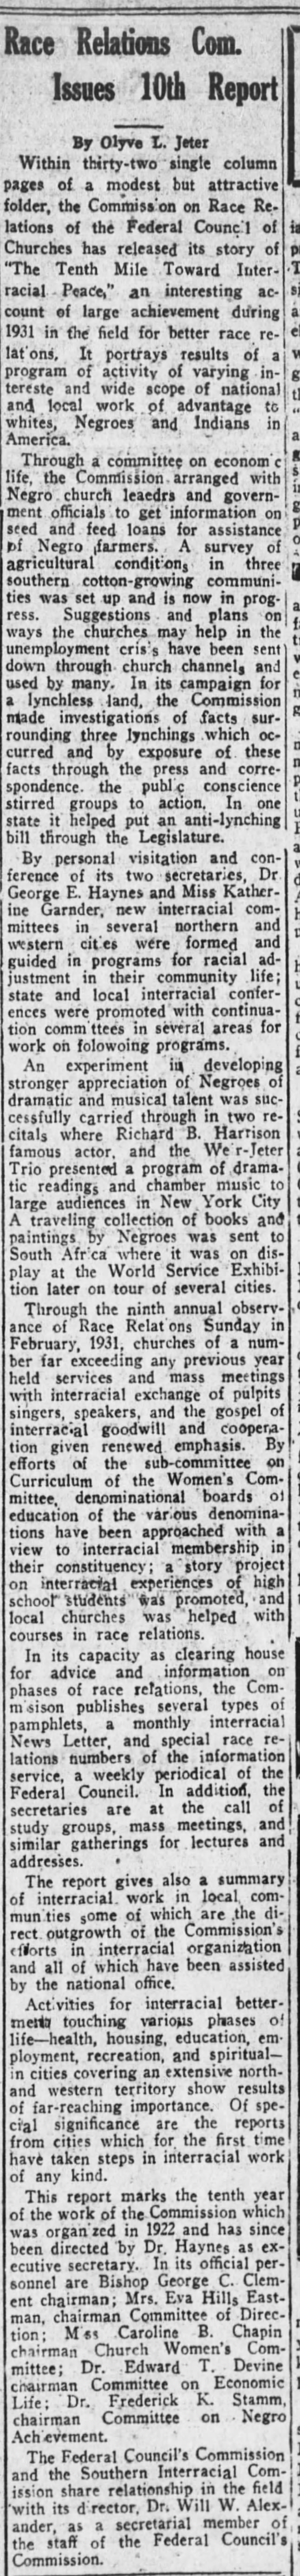 Written by Olive Jeter in 1932.  She married Urban League founder George Haynes decades later.